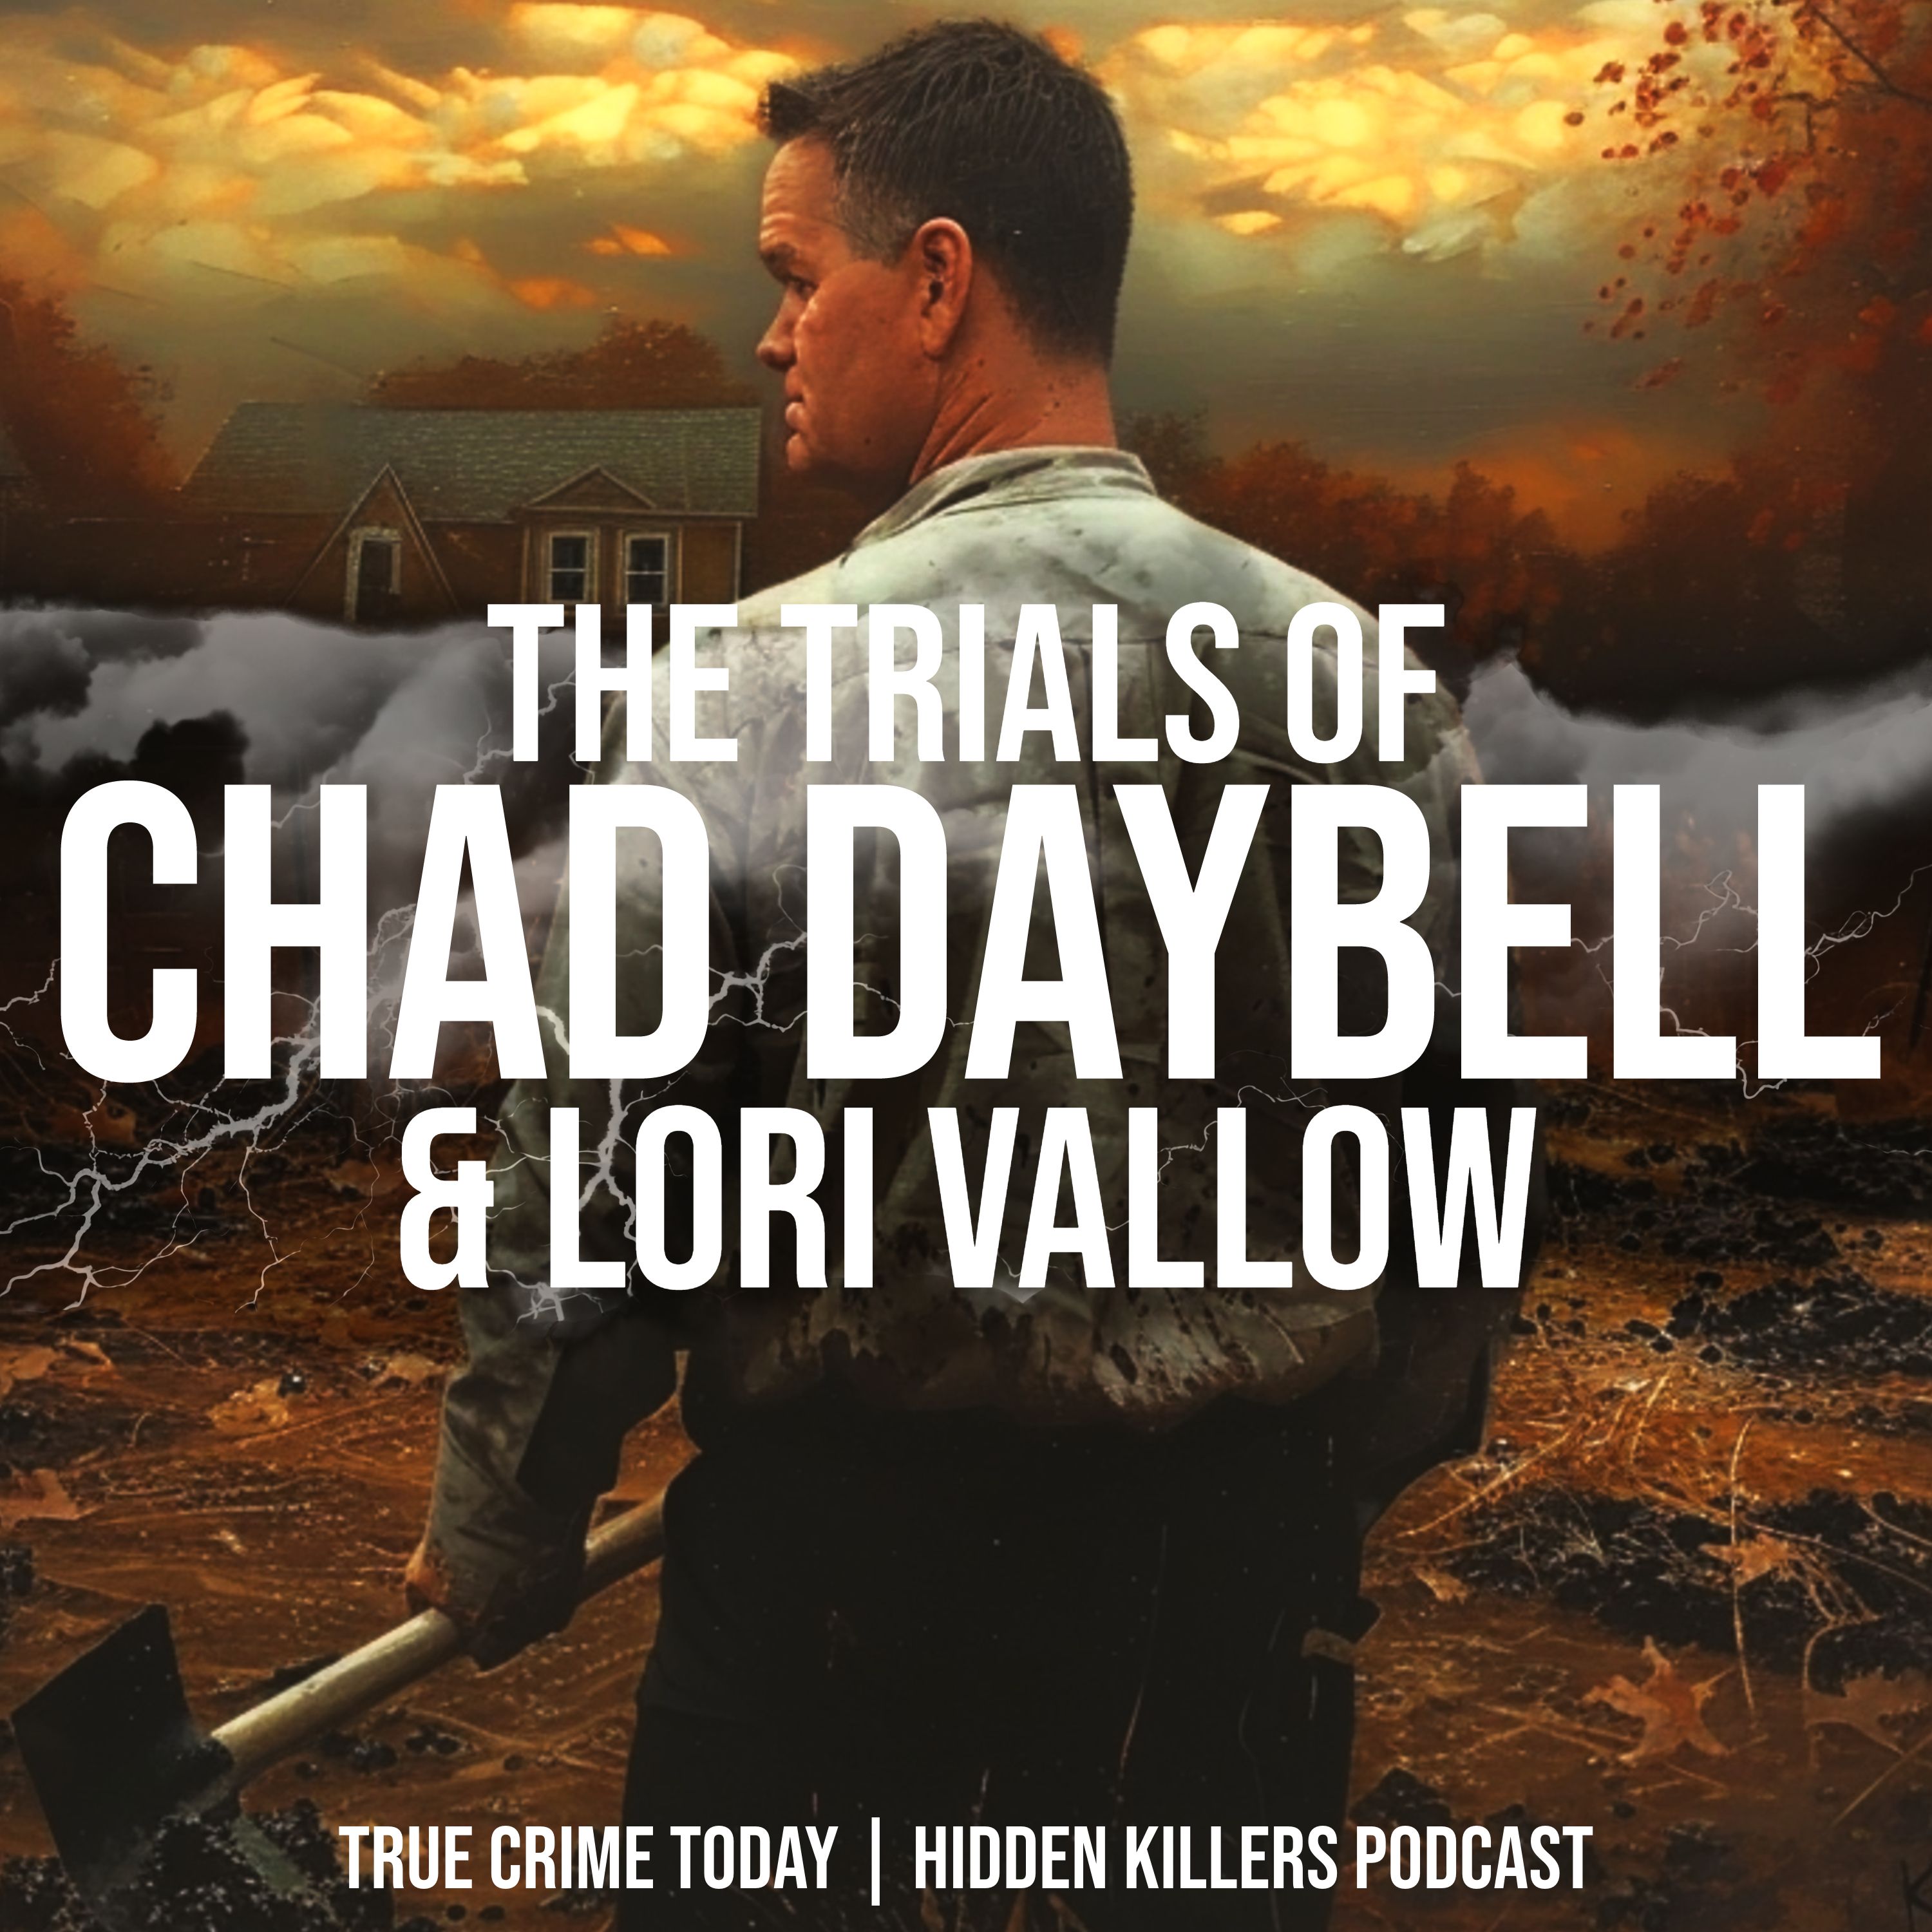 More Magical Thinking In The Trial Of Chad Daybell